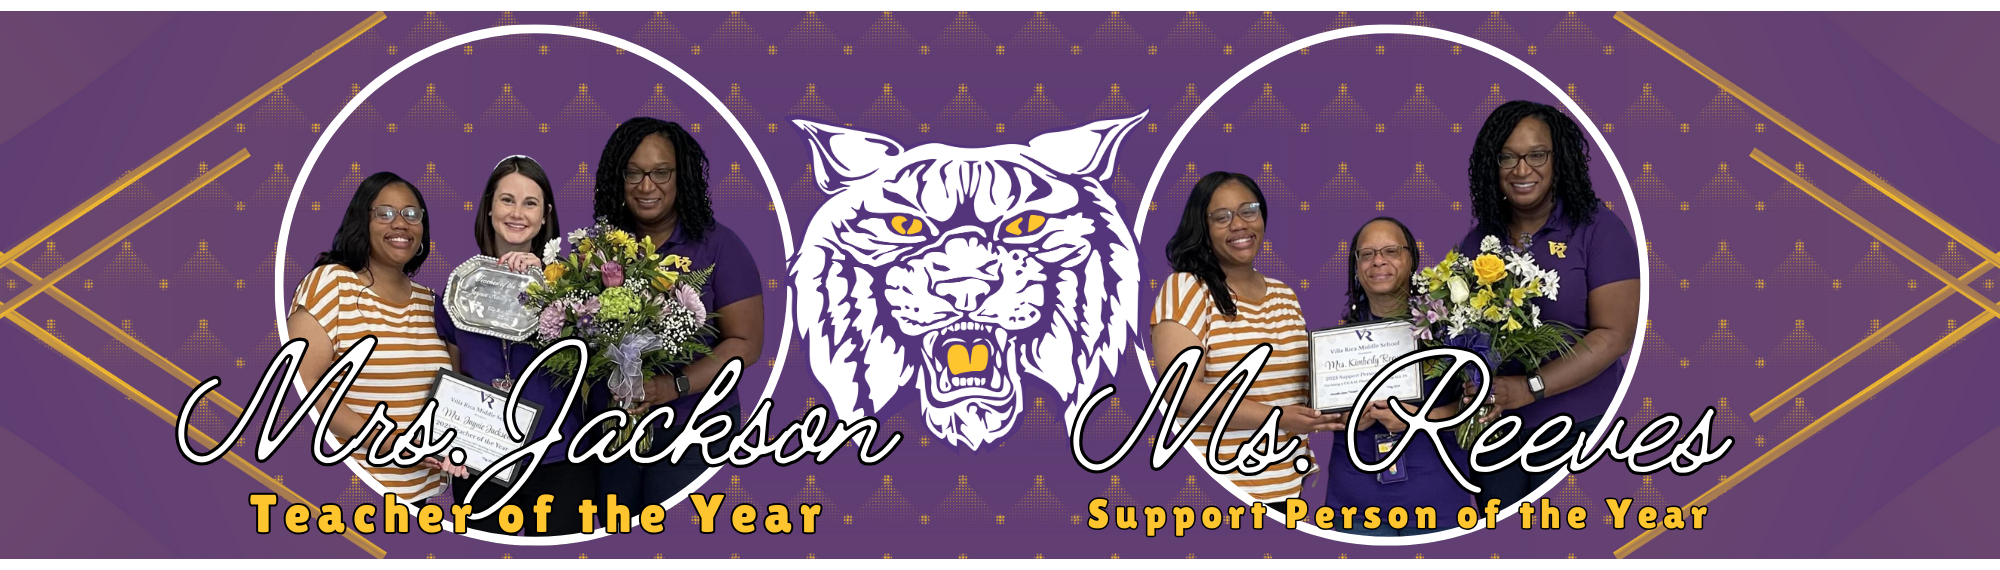 Photos of Jaynie Jackson, teacher of the year and Kimberly Reeves, support person of the year along with the admin and a wildcat face.